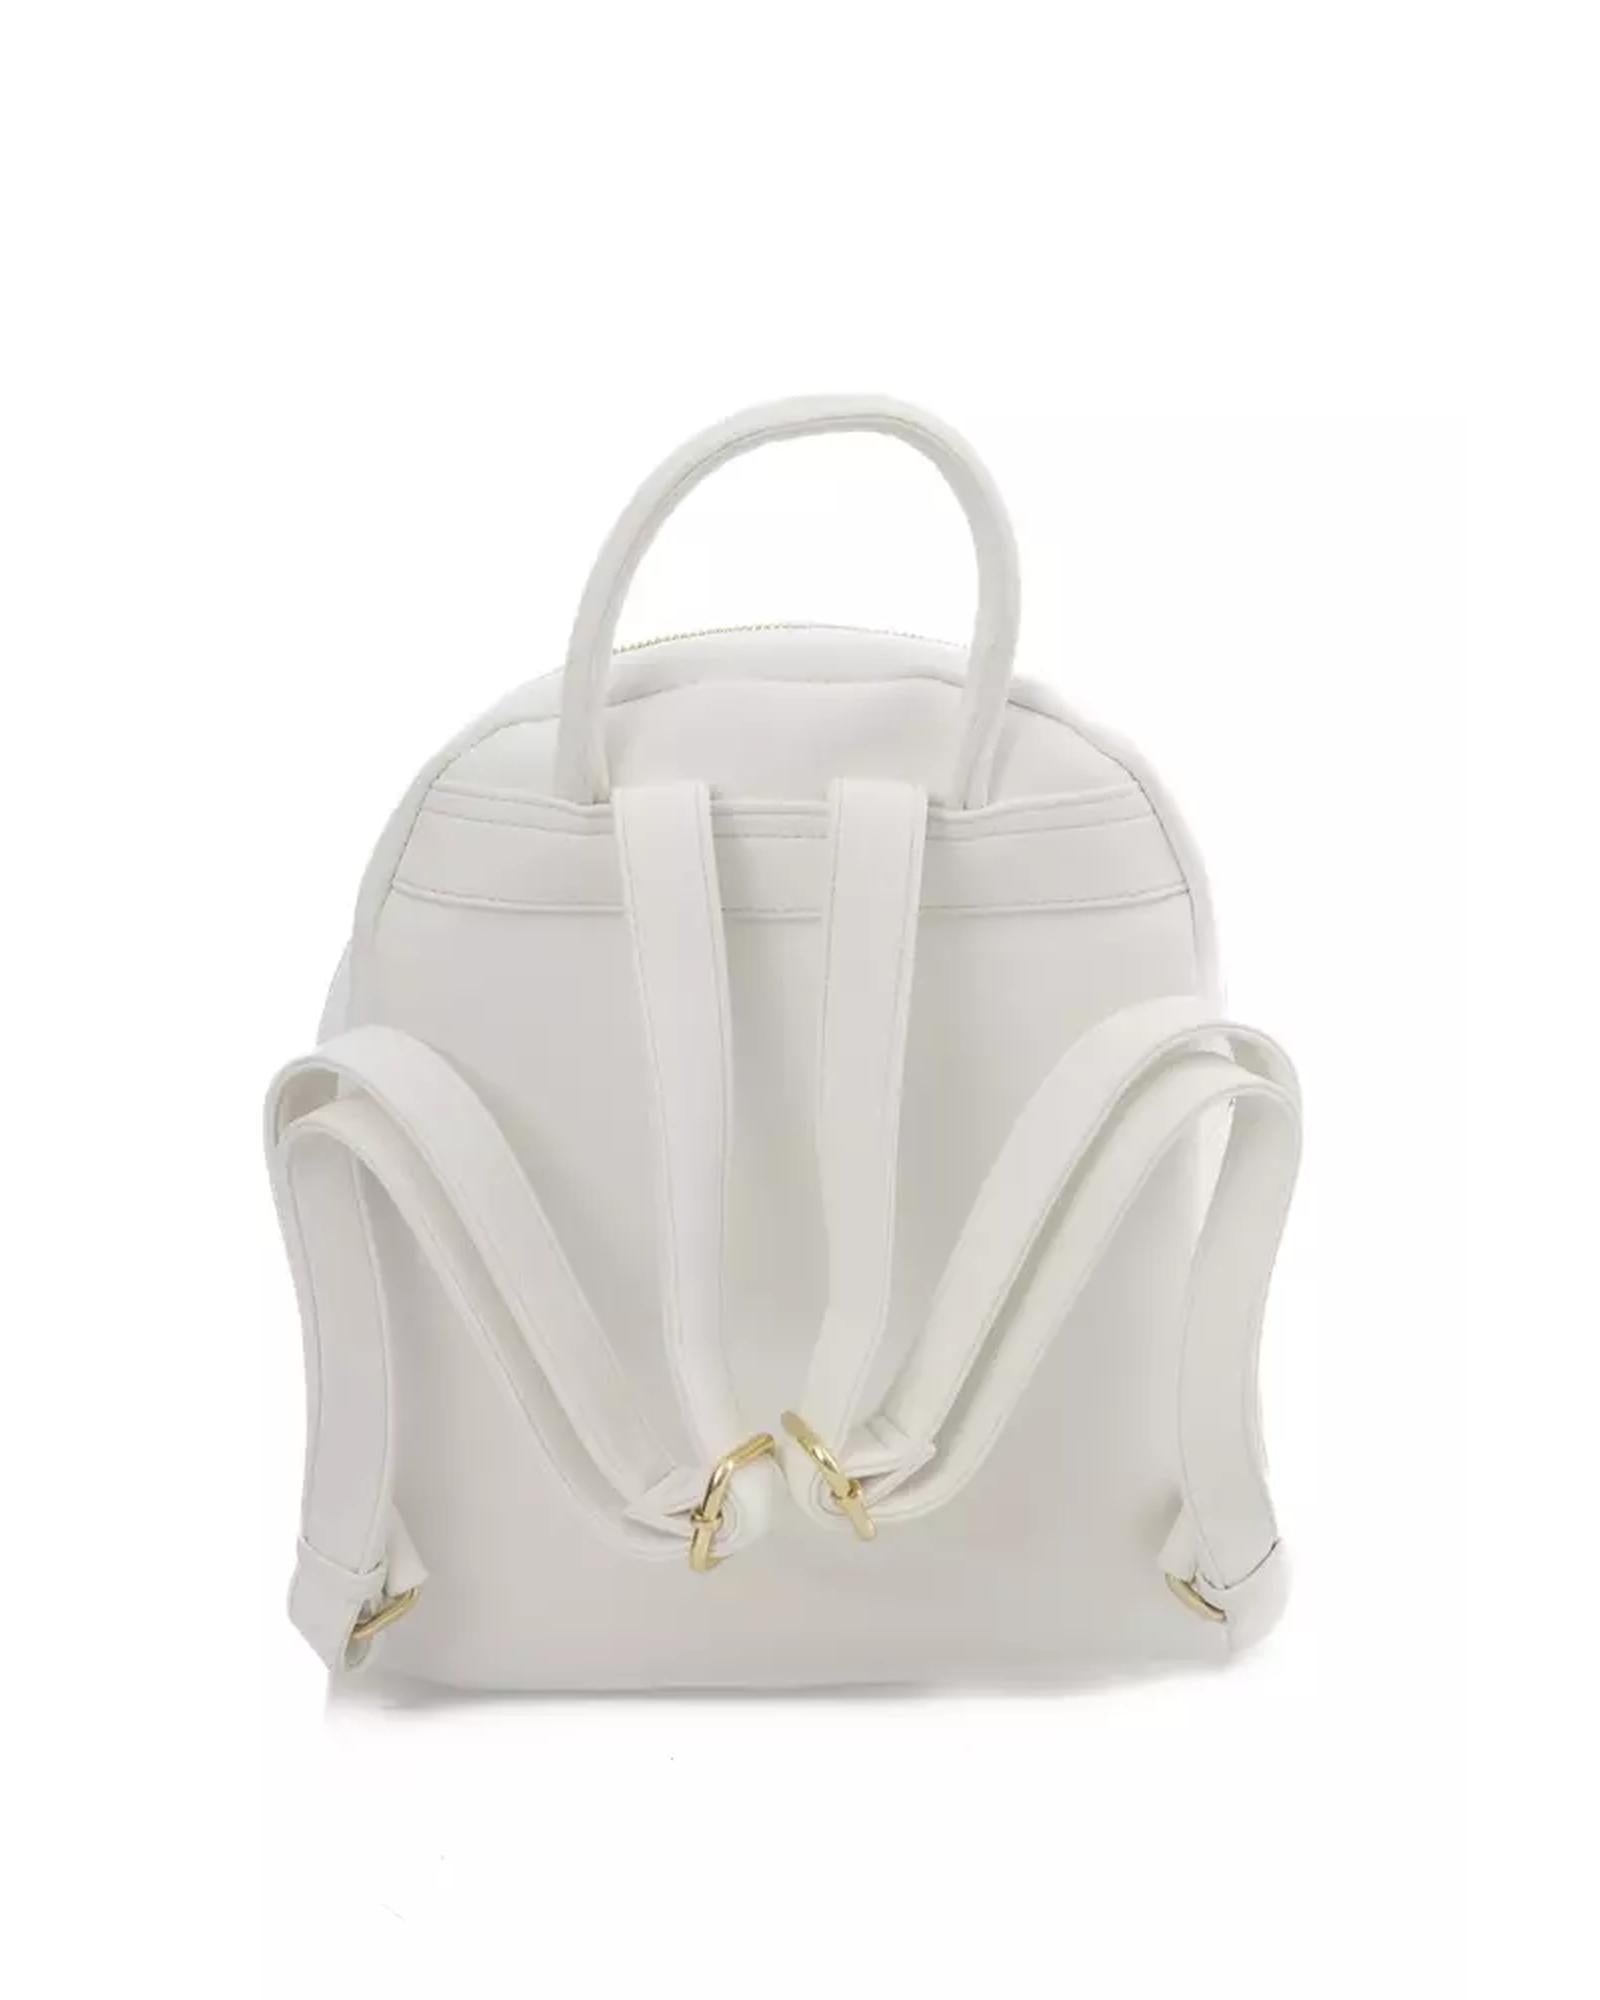 Golden Logo Zip Closure Backpack with Adjustable Straps One Size Women